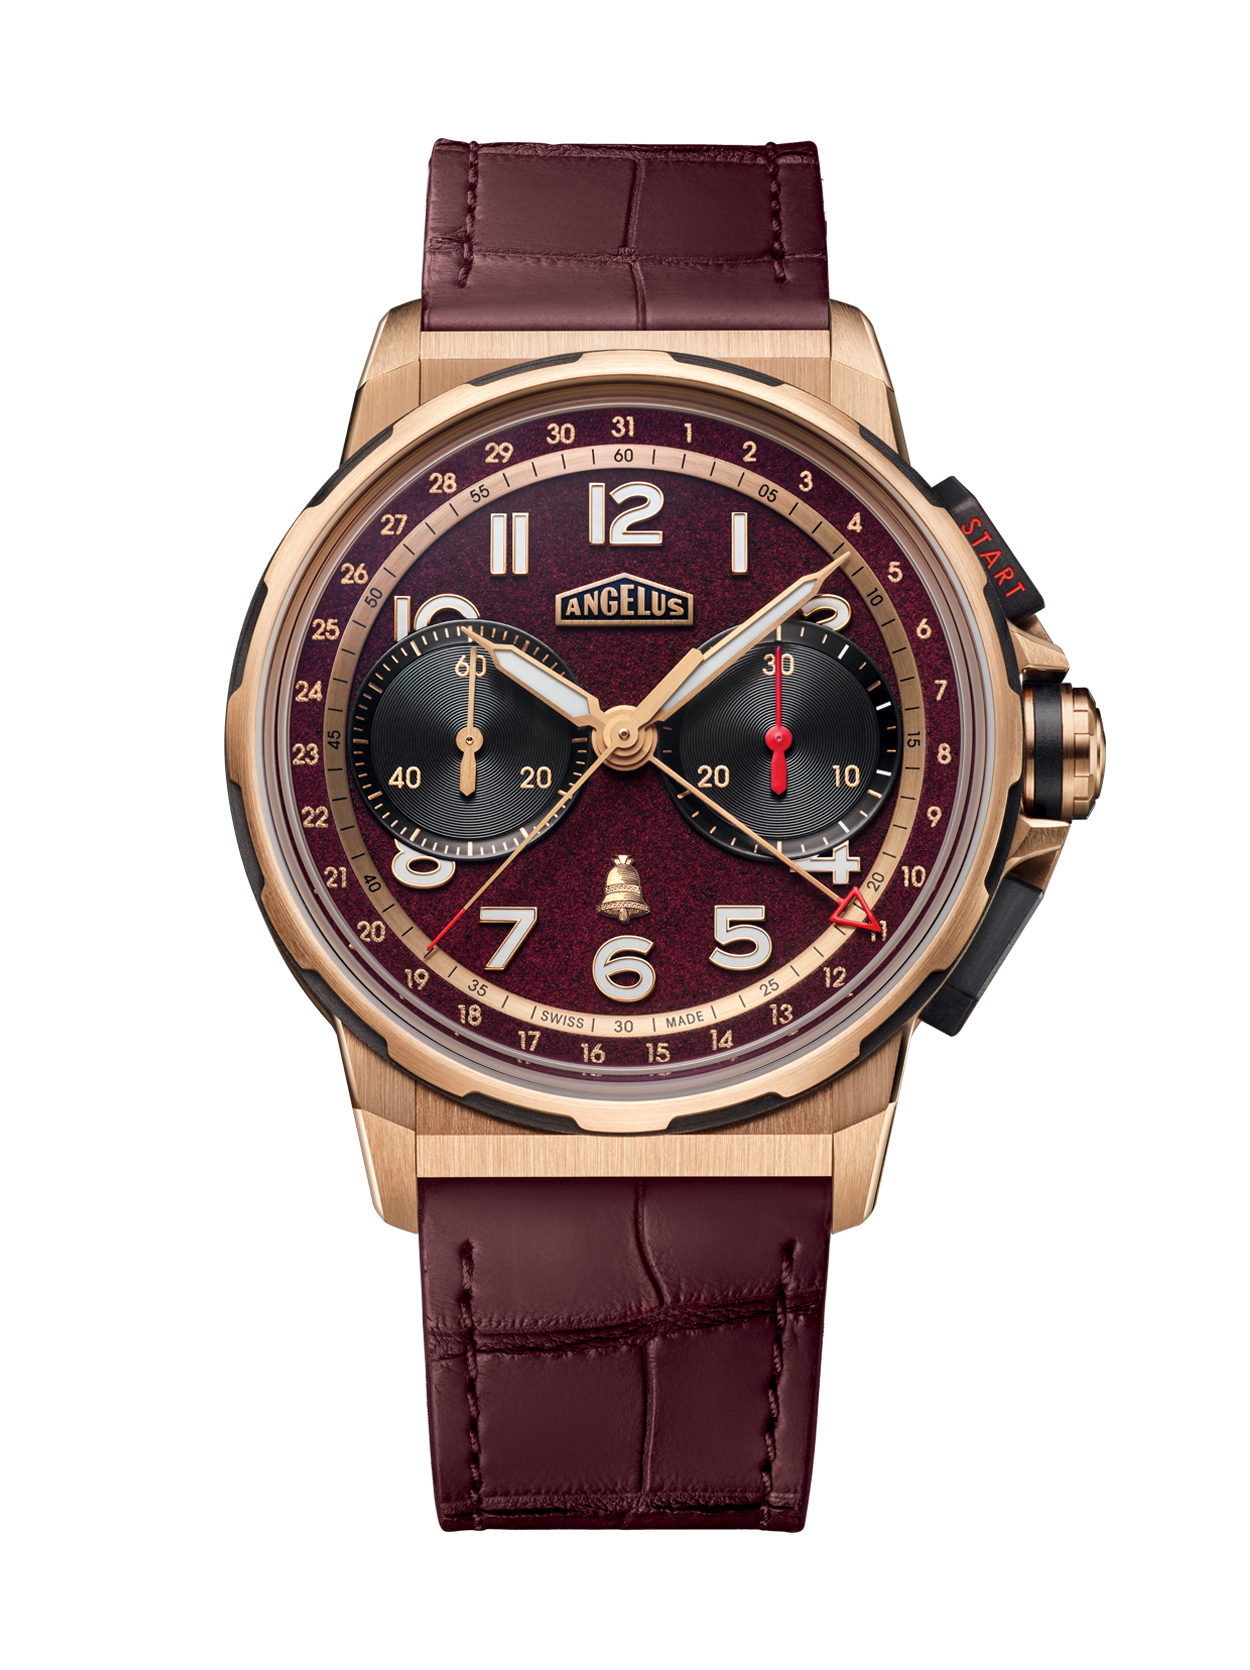 ONLY WATCH 2023: CHRONODATE GOLD x CHÂTEAU ANGELUS